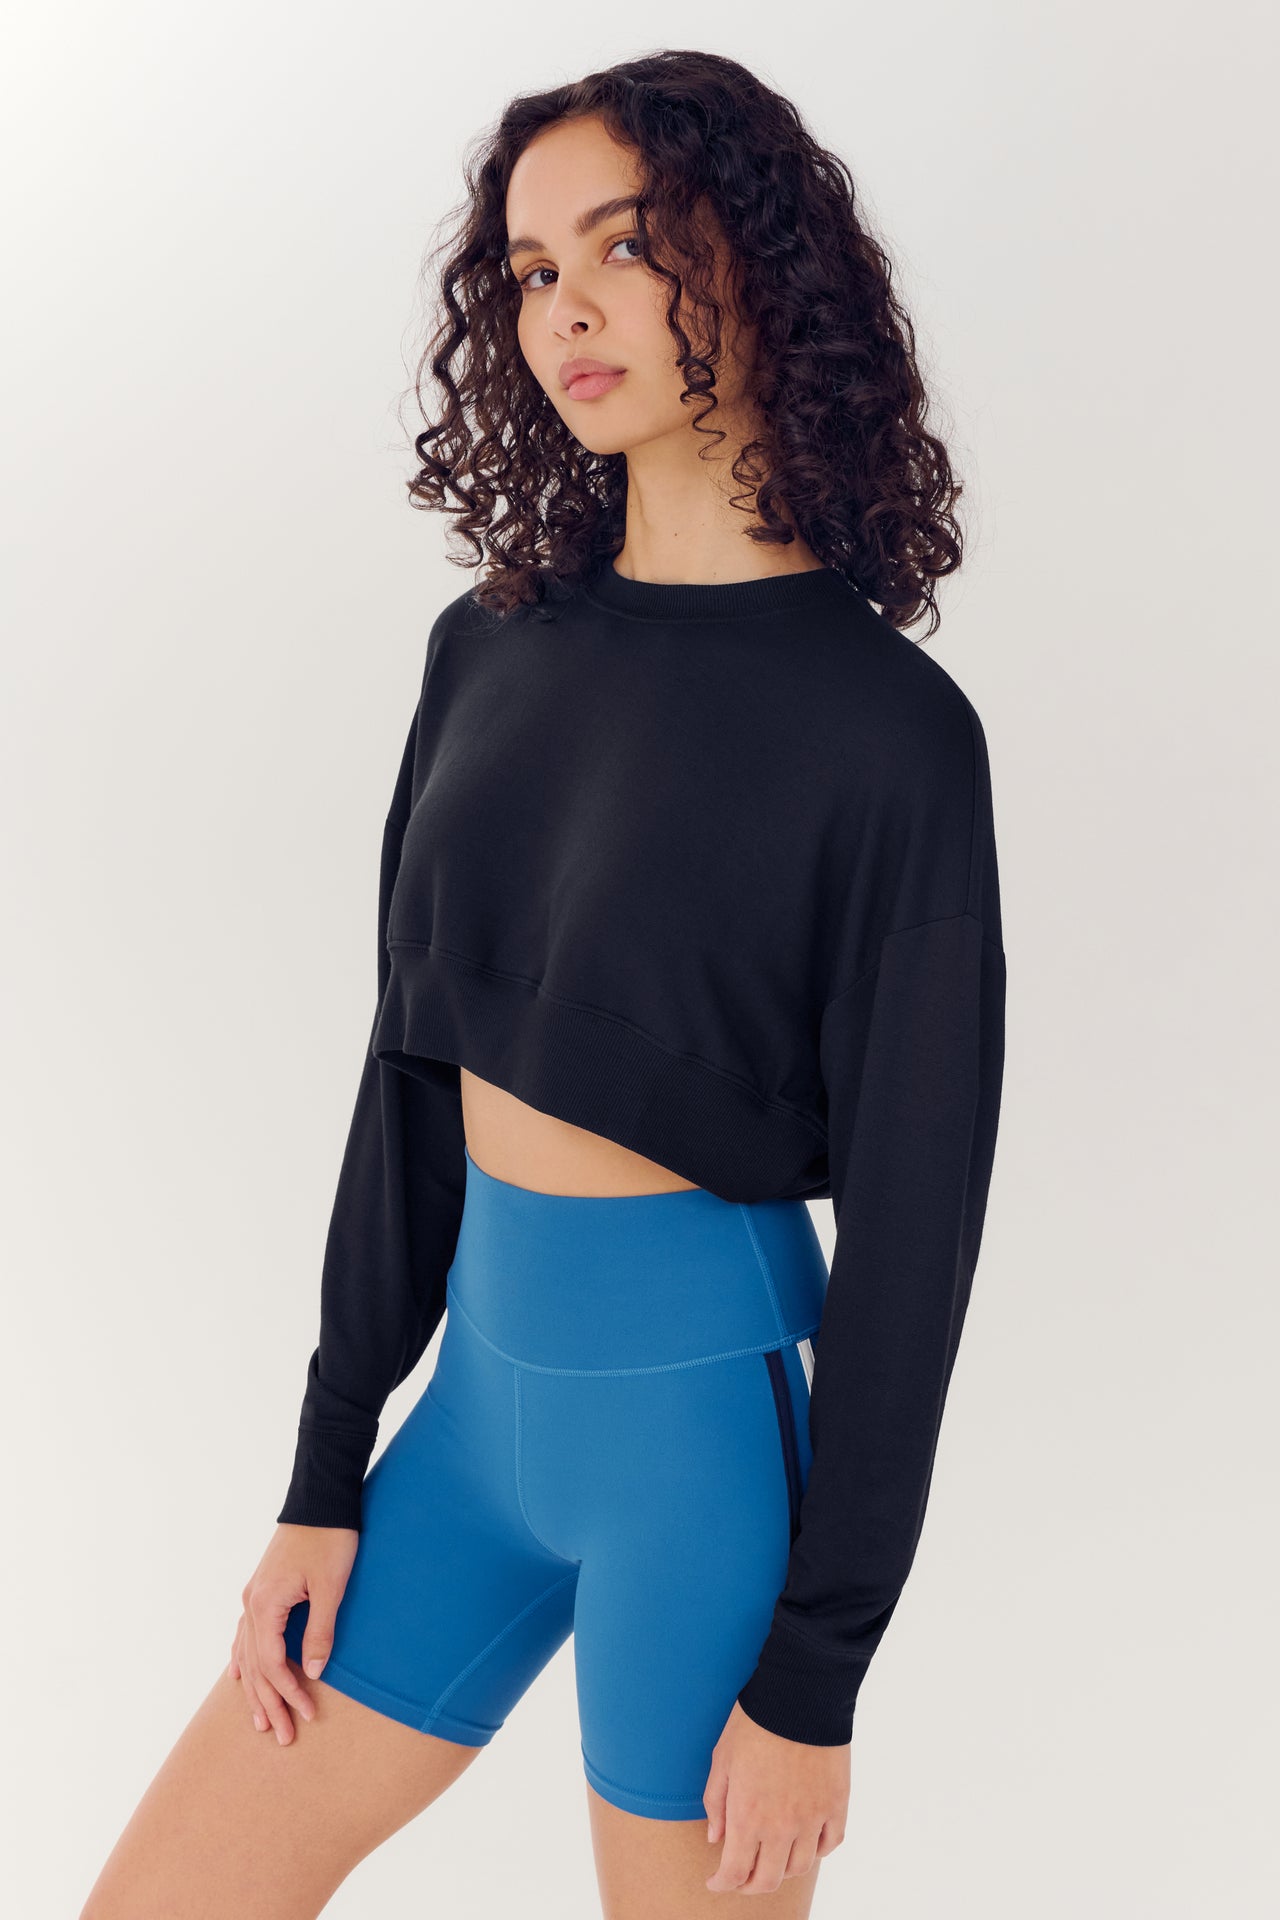 A woman with curly hair wearing a SPLITS59 Noah Fleece Crop Sweatshirt in Black and blue high-waisted shorts stands against a white background.